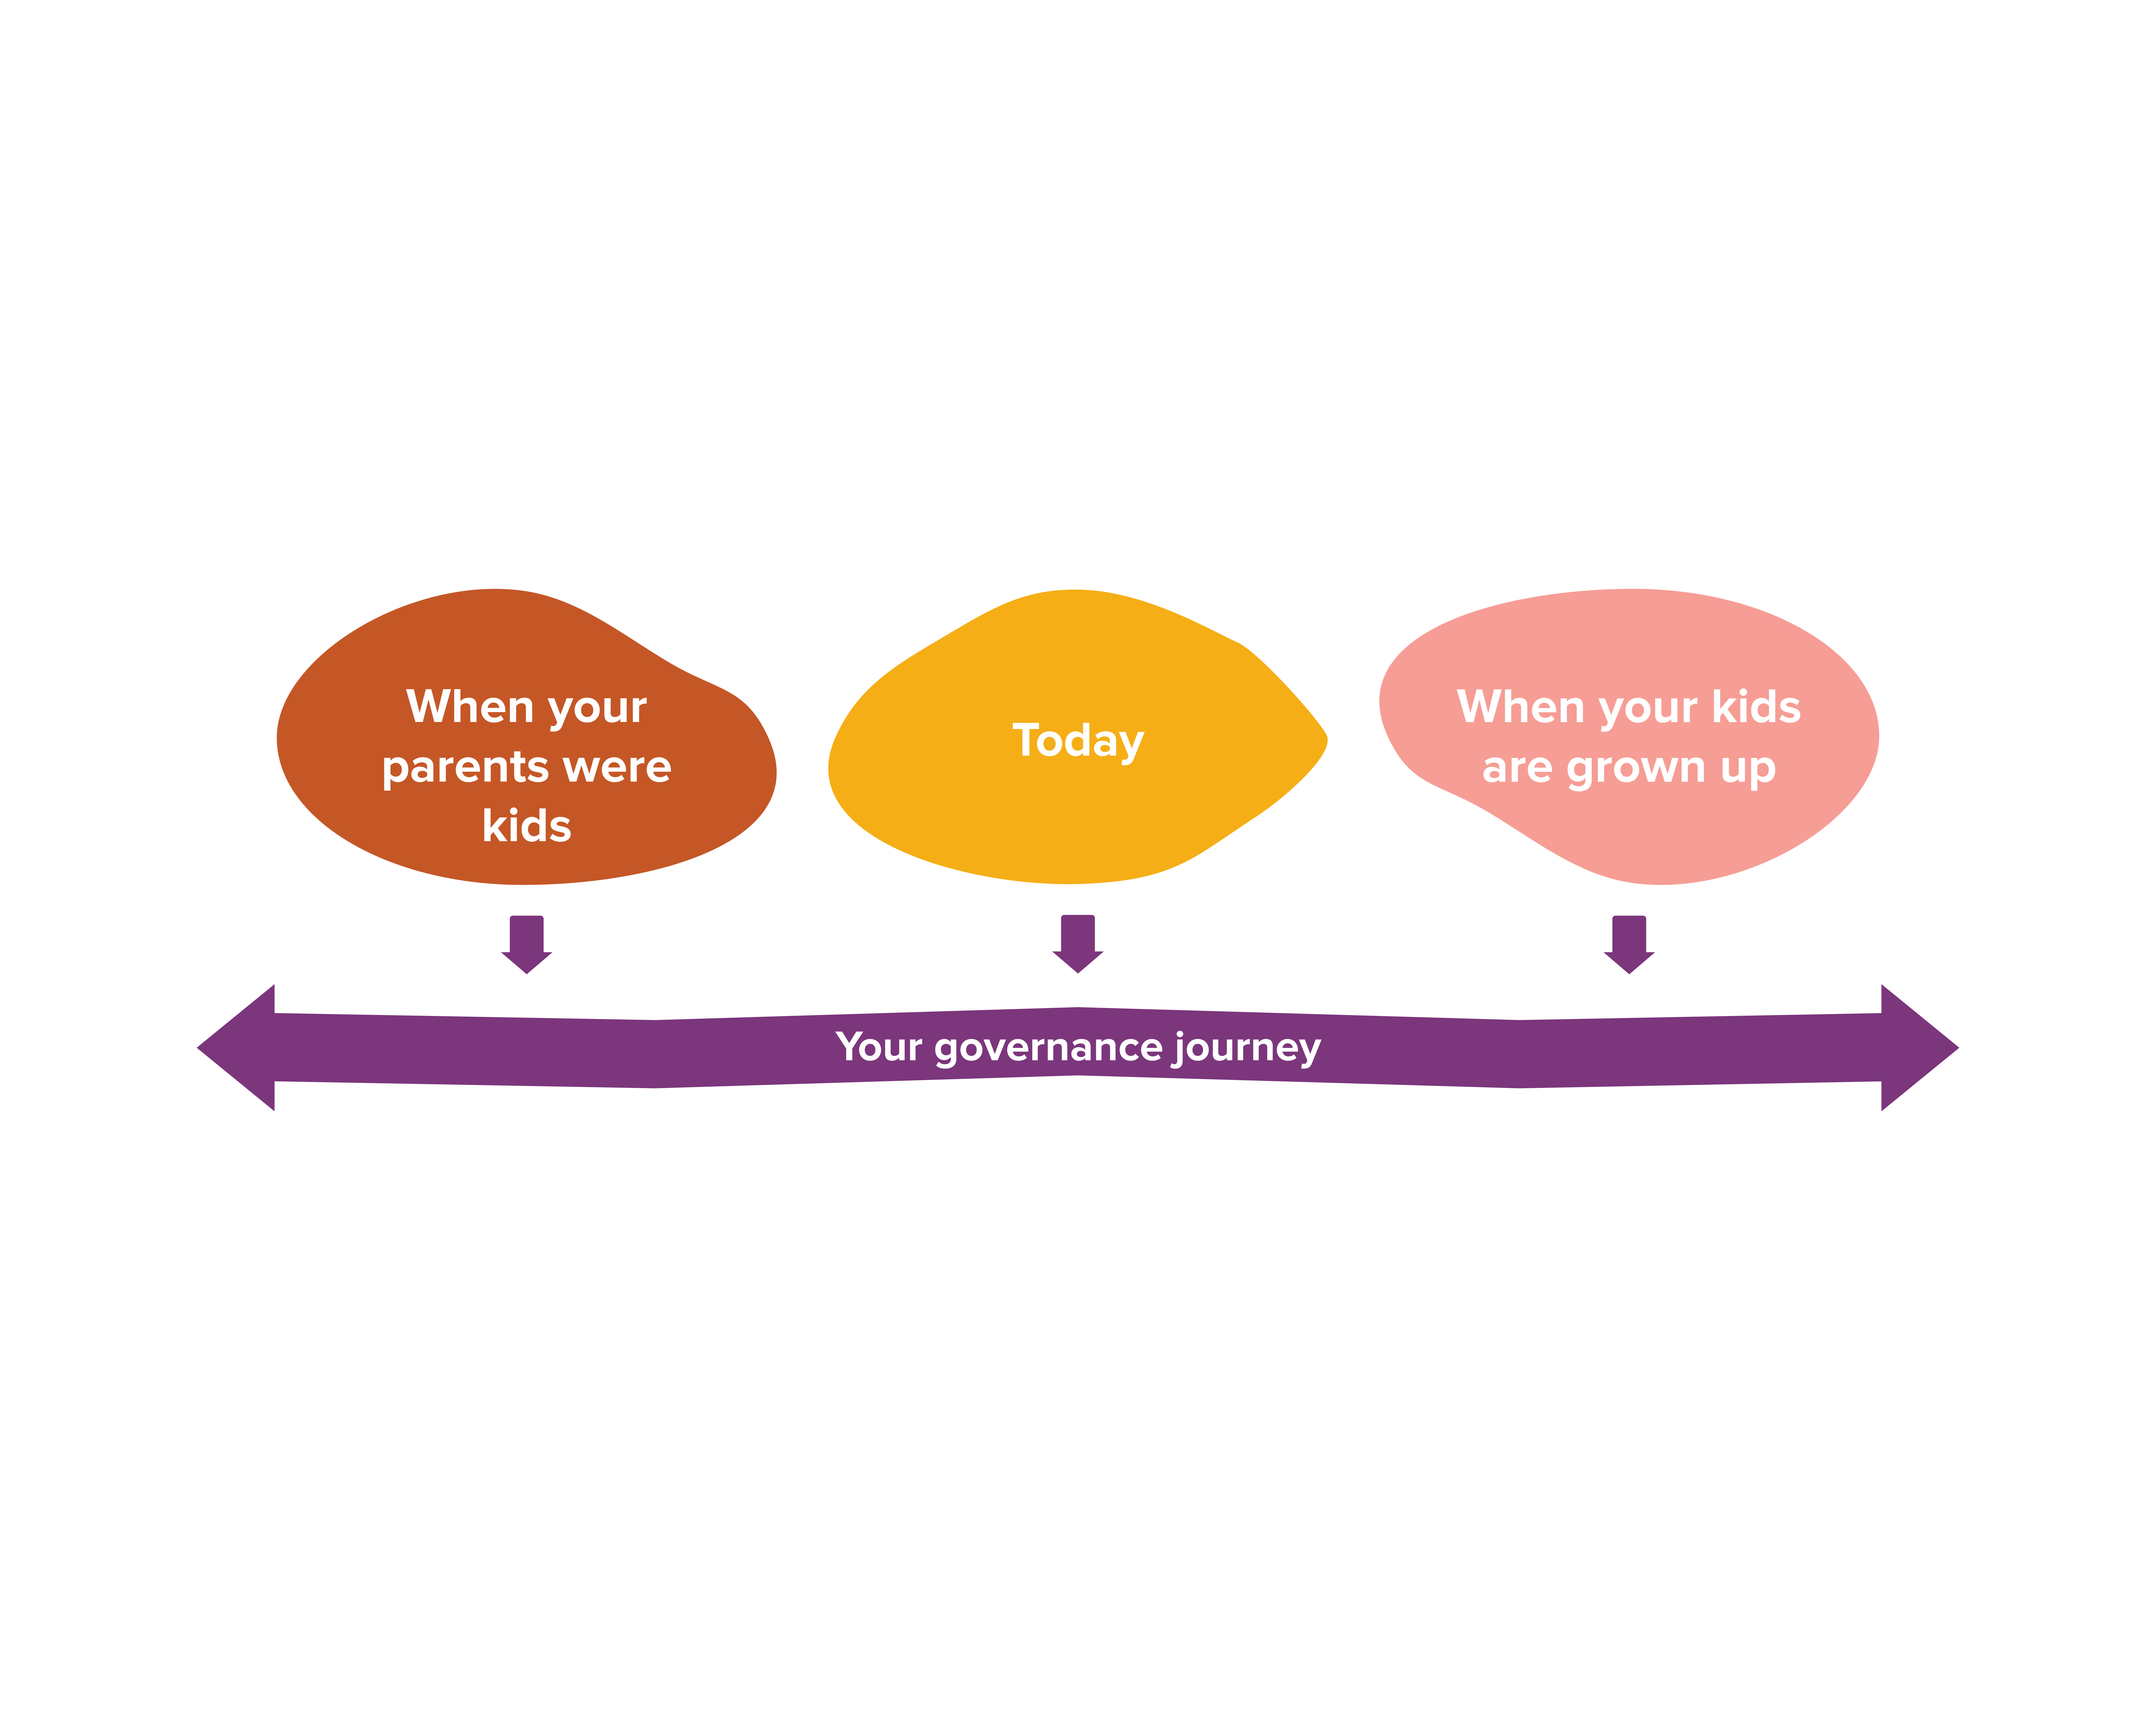 Your governance journey